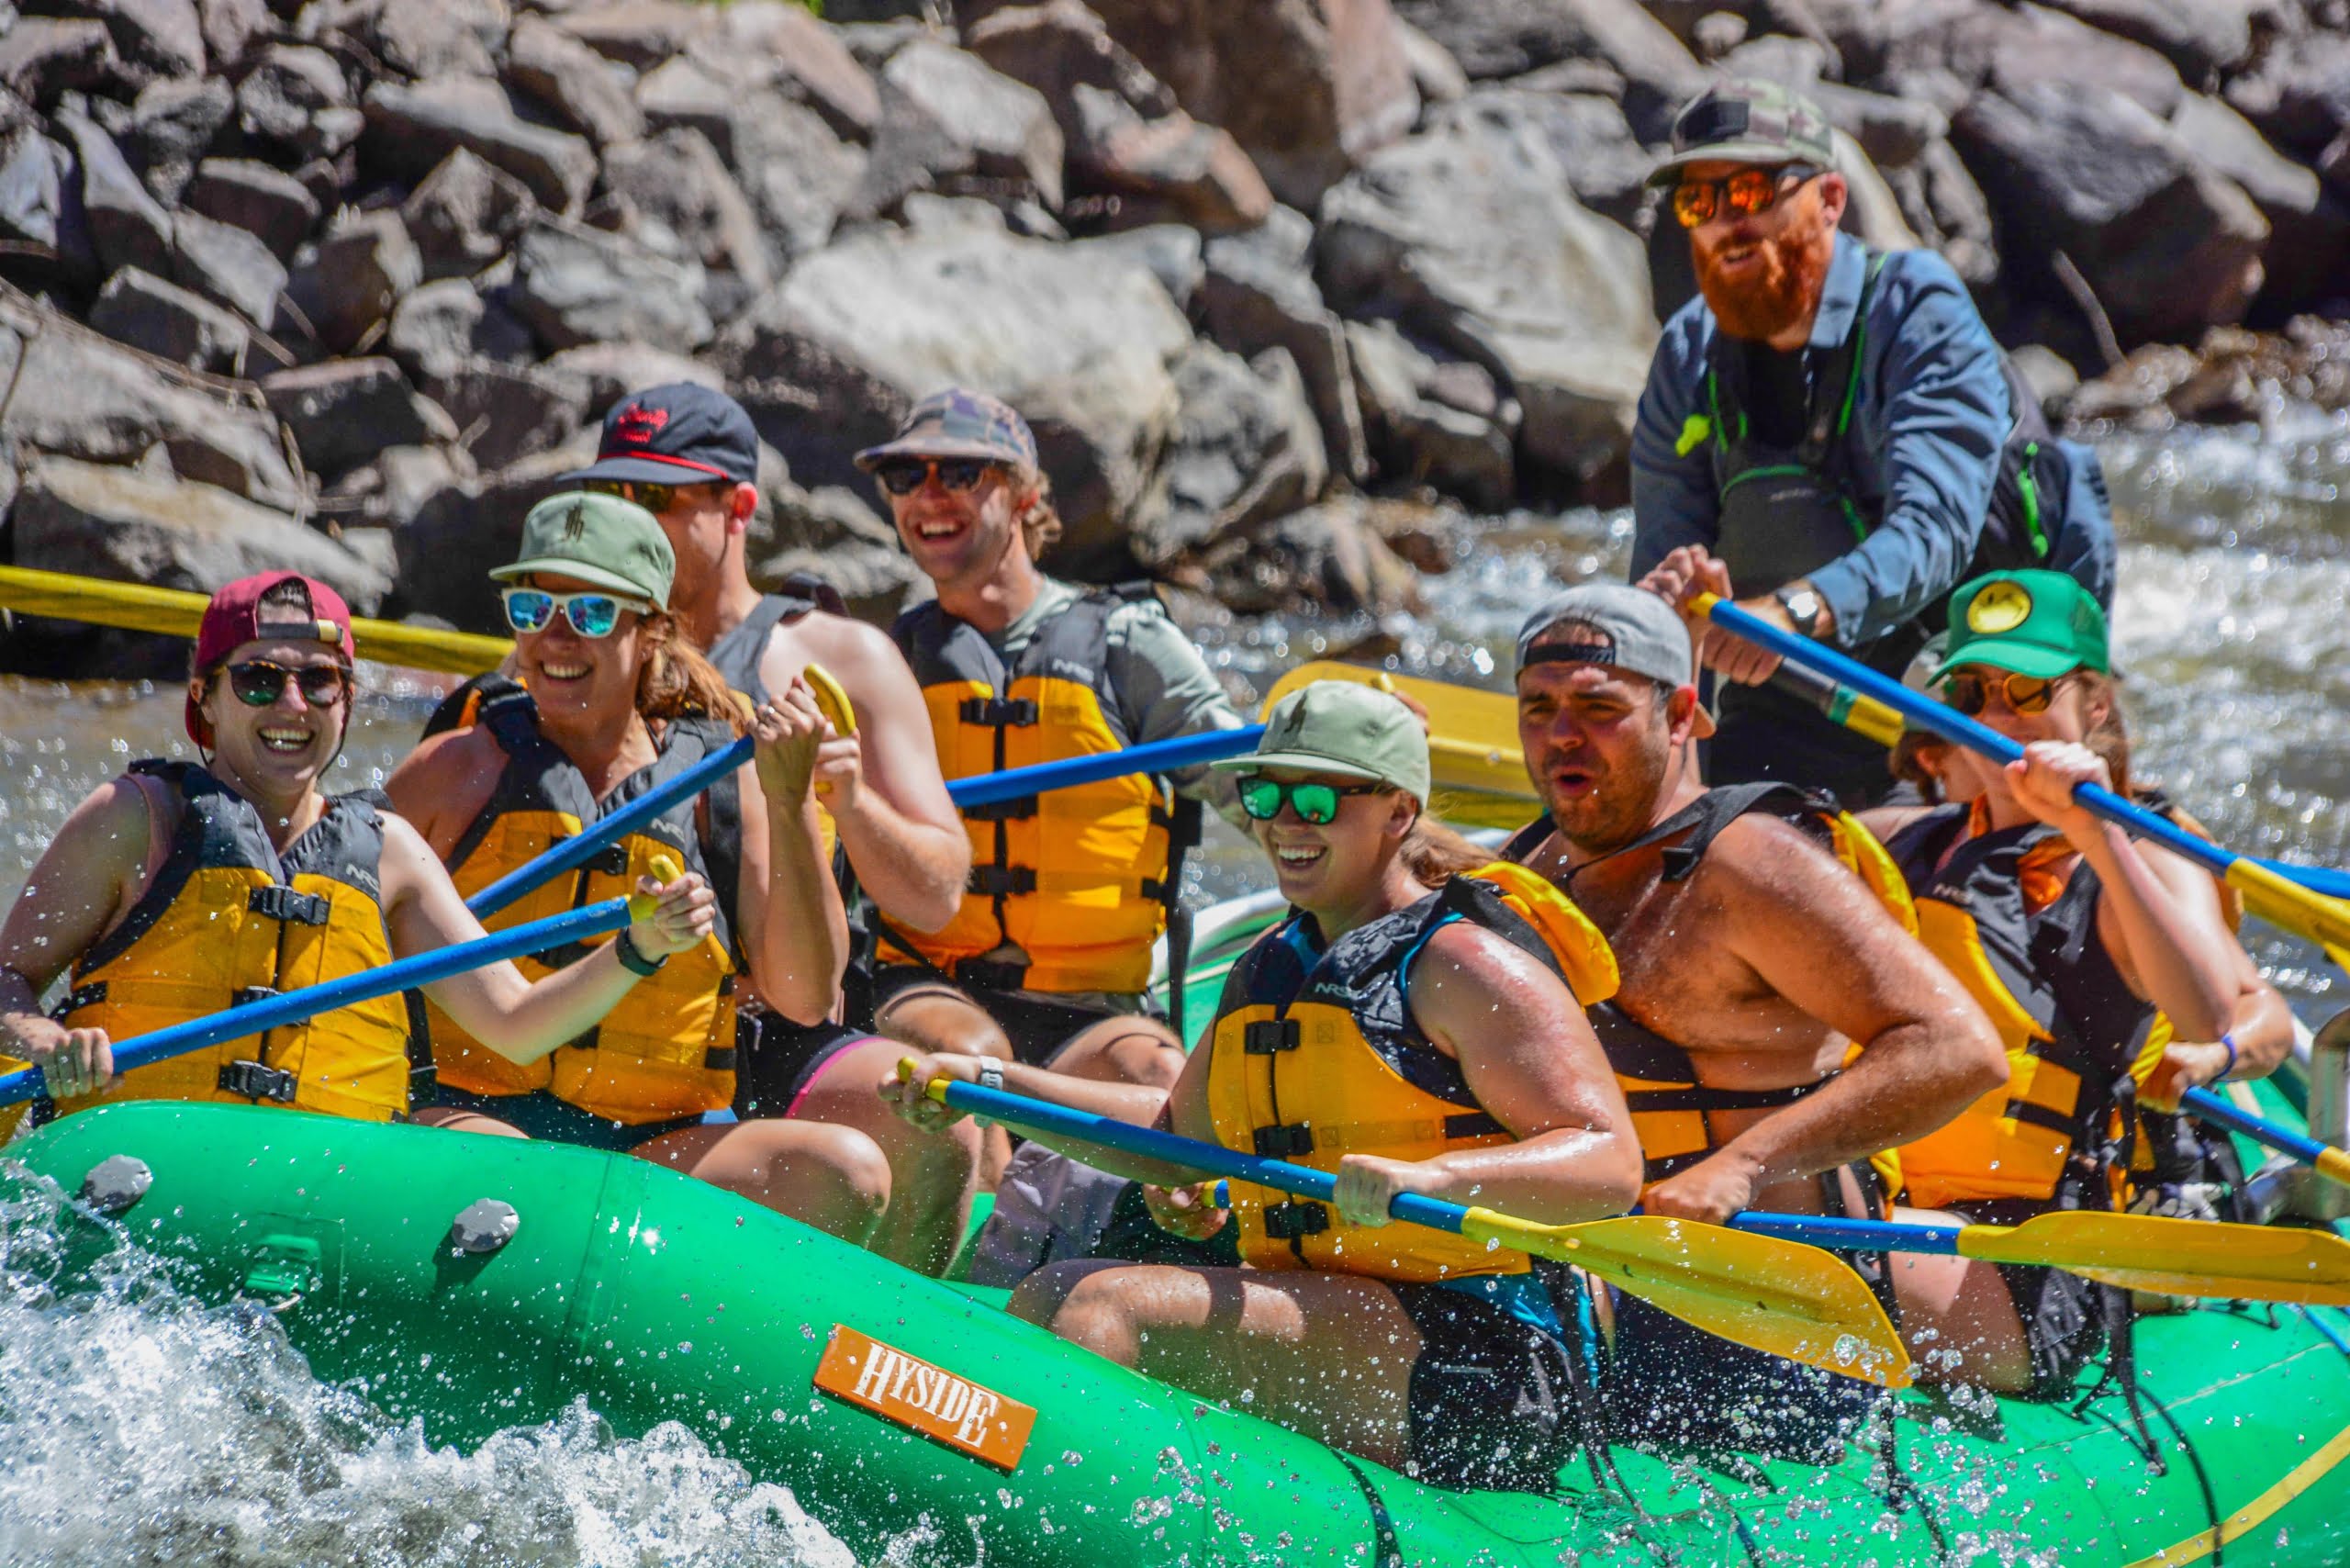 Group Rafting near Winter Park on the Colorado River